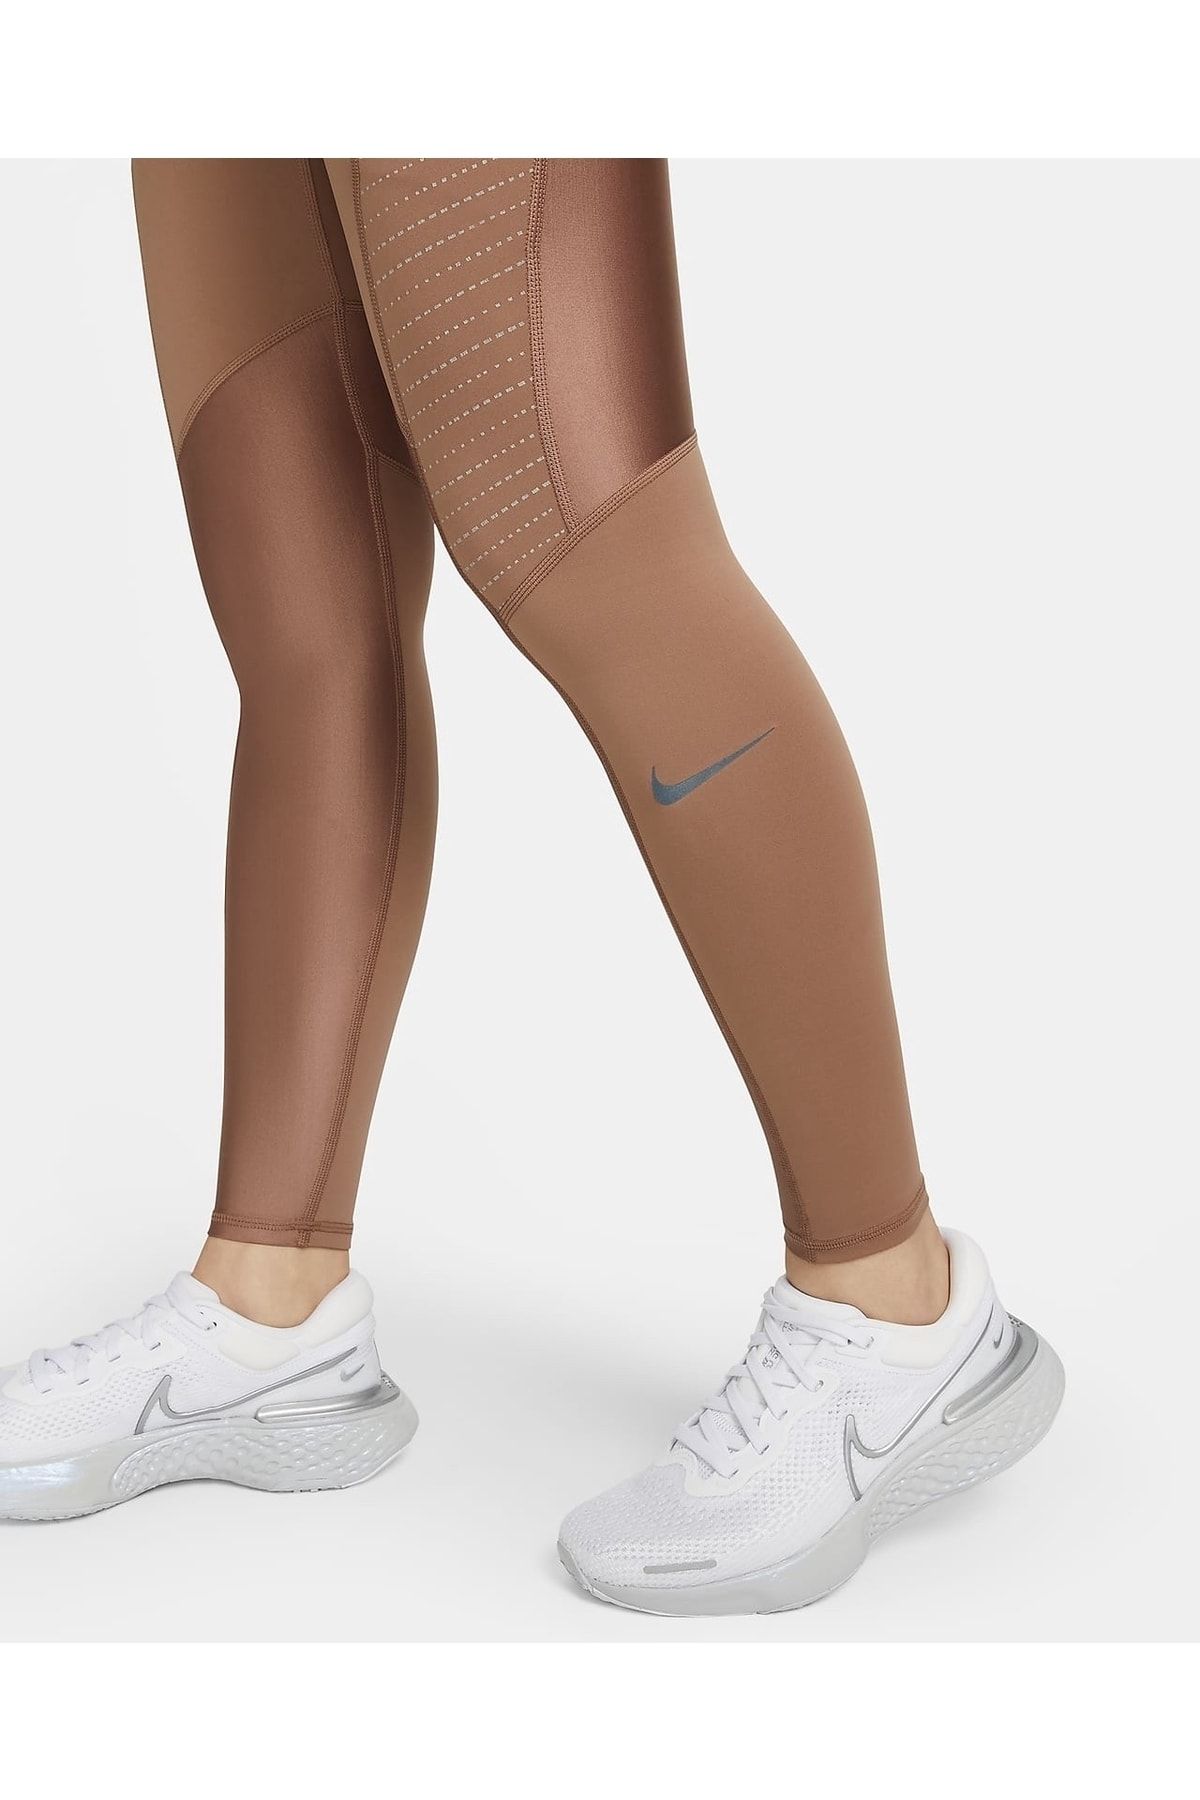 $140 NEW Women's Nike Run Division Epic Lux Mid-Rise Wool Leggings  CU6187-010 XS